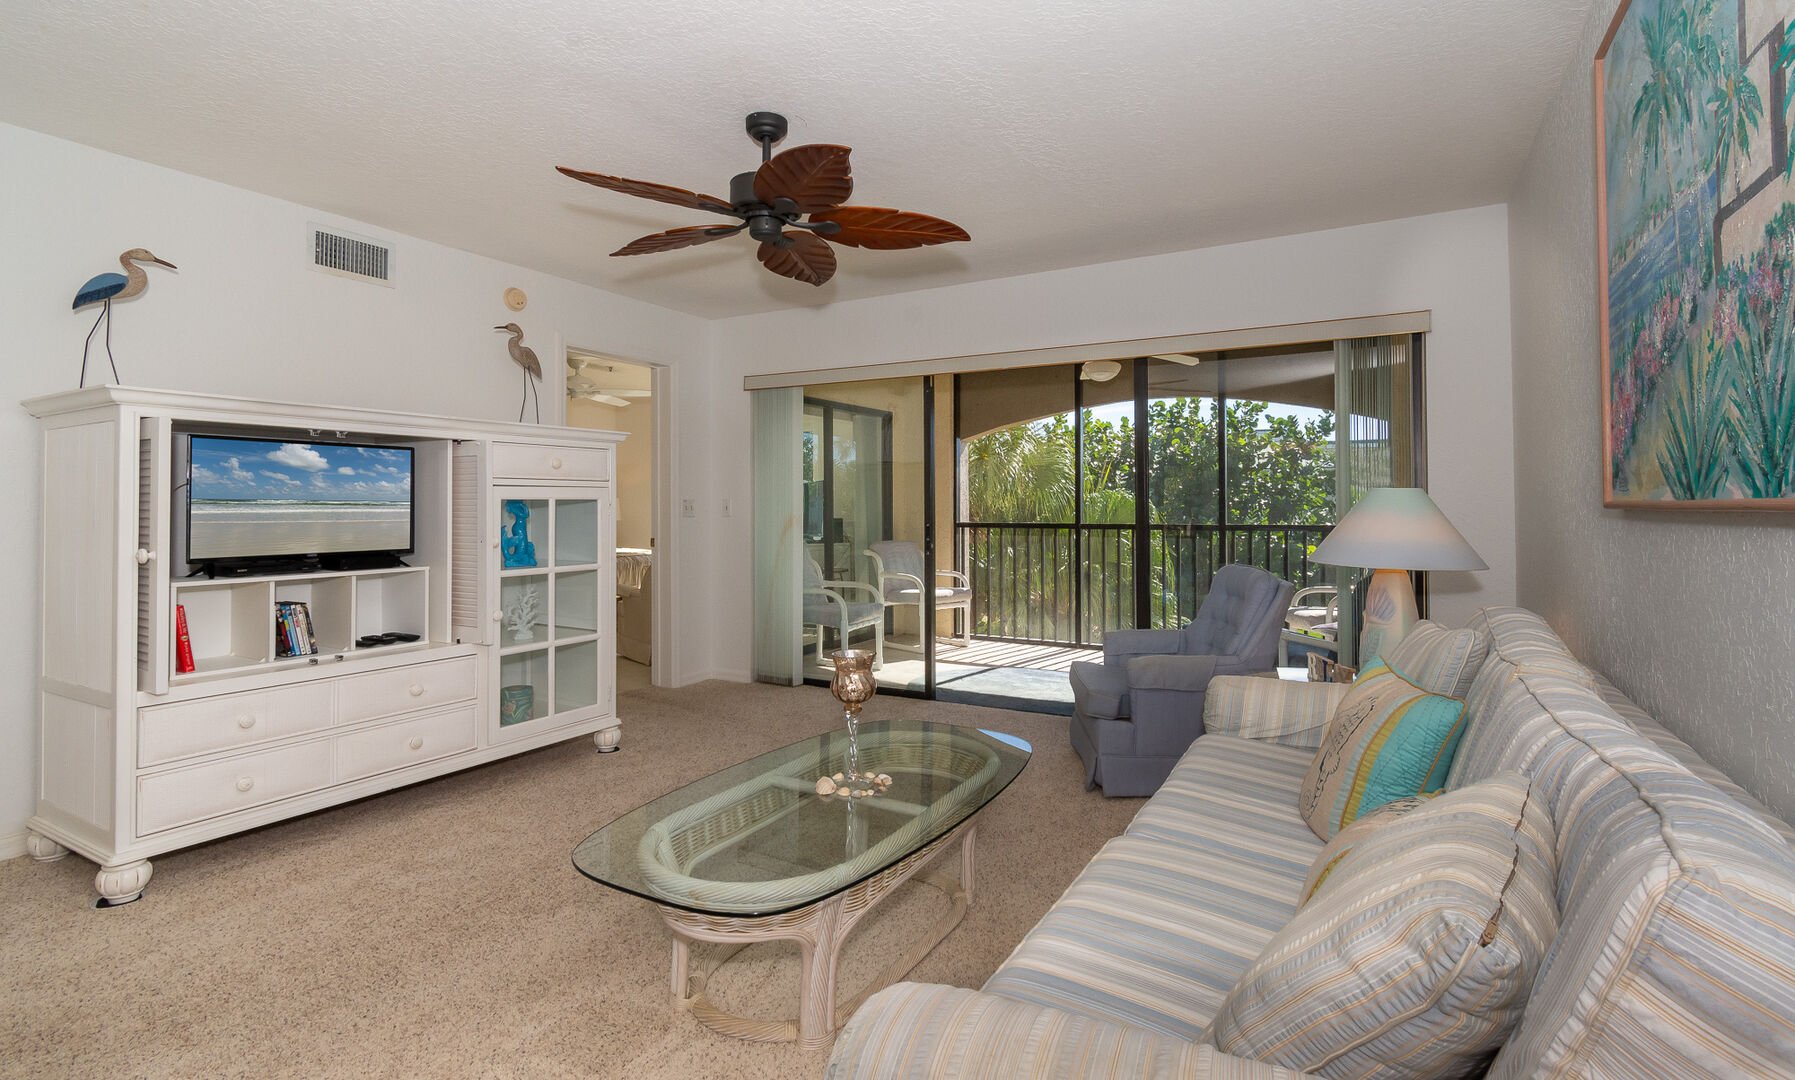 interior view of fully furnished new smyrna beach condo rental